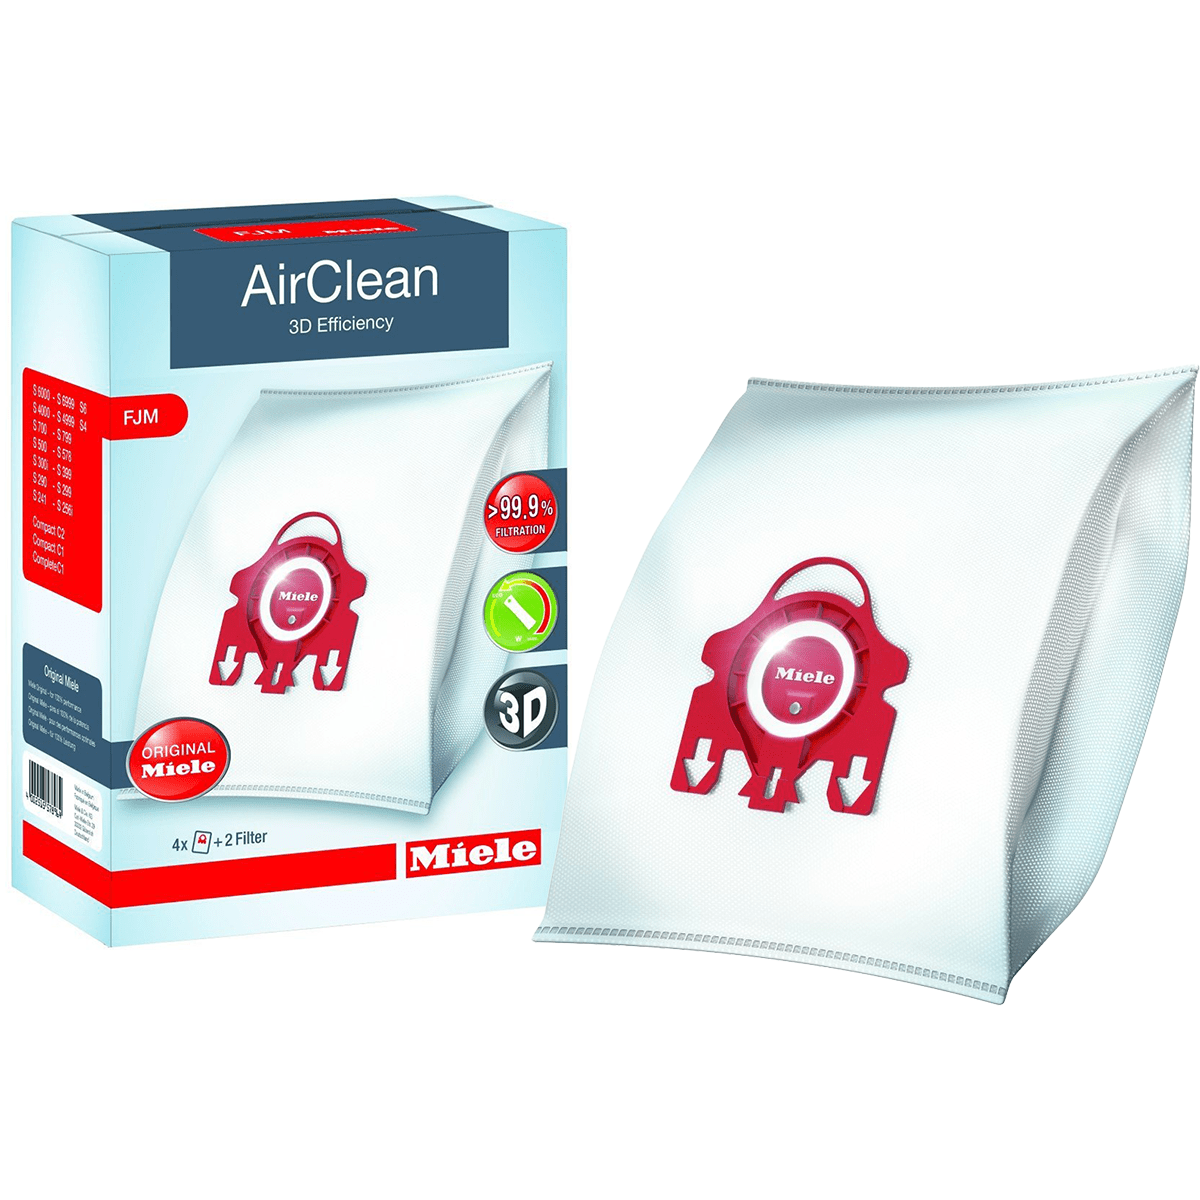 AirClean HyClean Miele FJM Compatible Canister Vacuum Bags 5-Pack w/ 2 Filters 